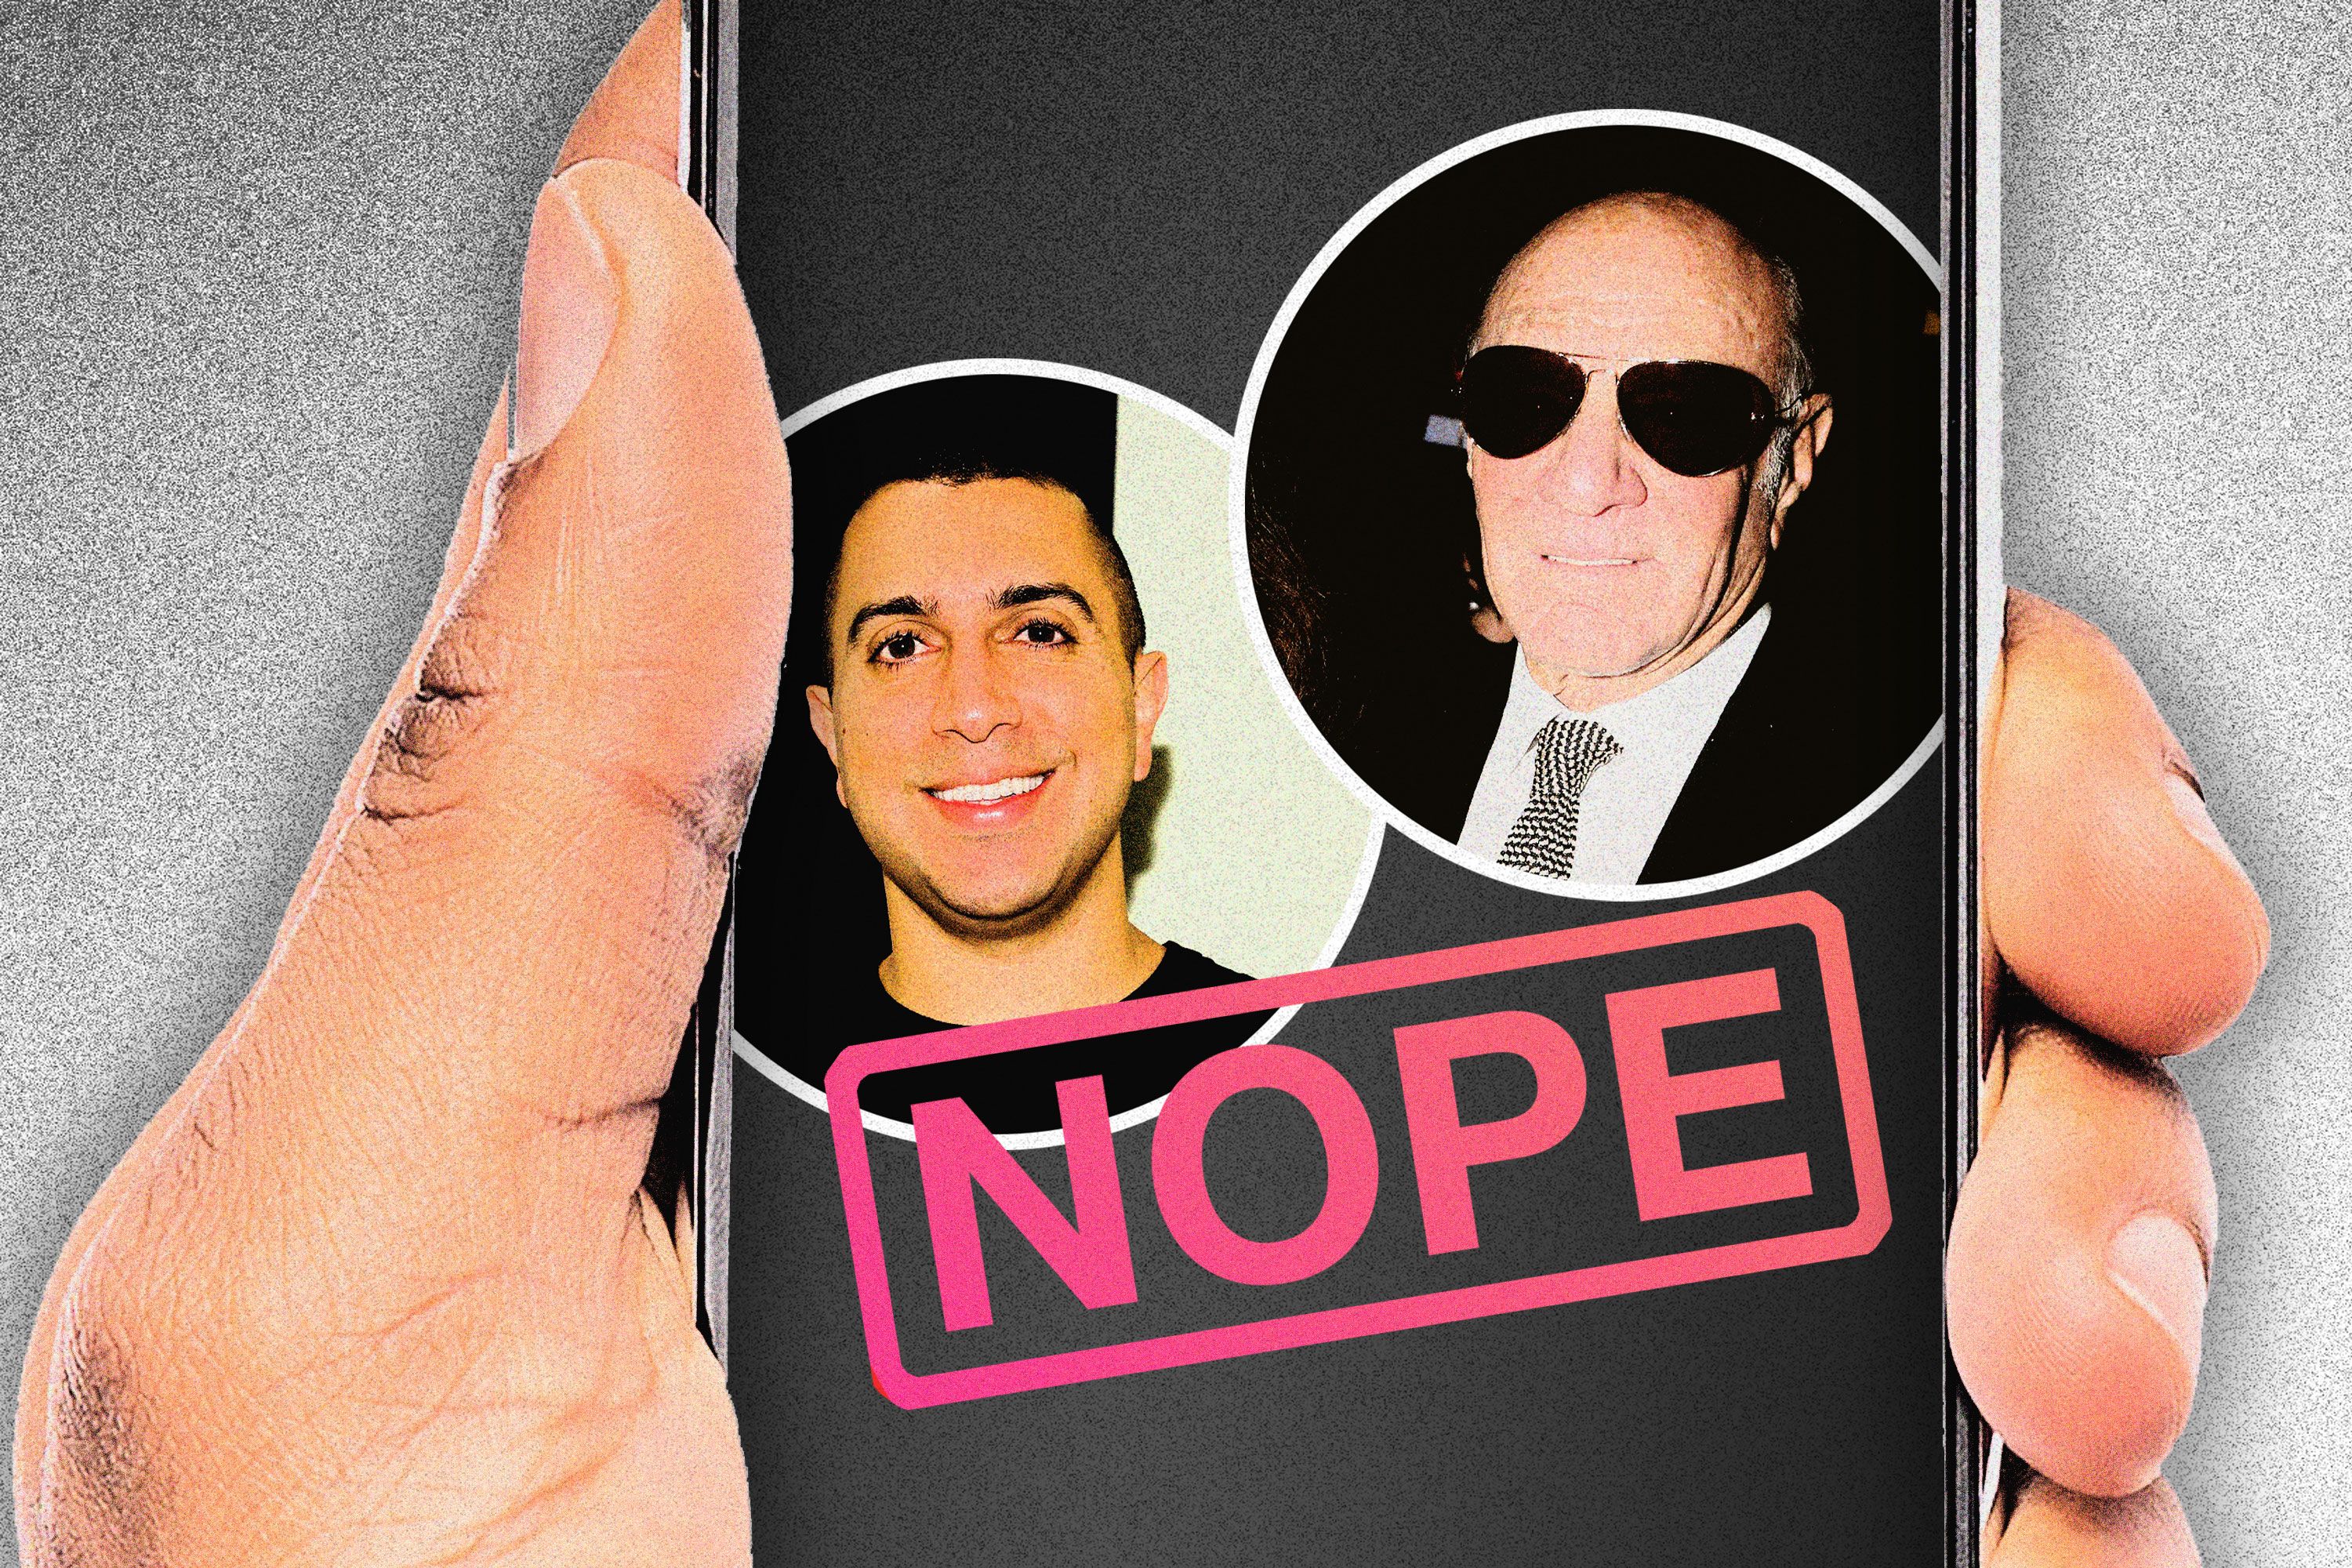 The Tinder Revenge Story Between Sean Rad and Barry Diller picture pic